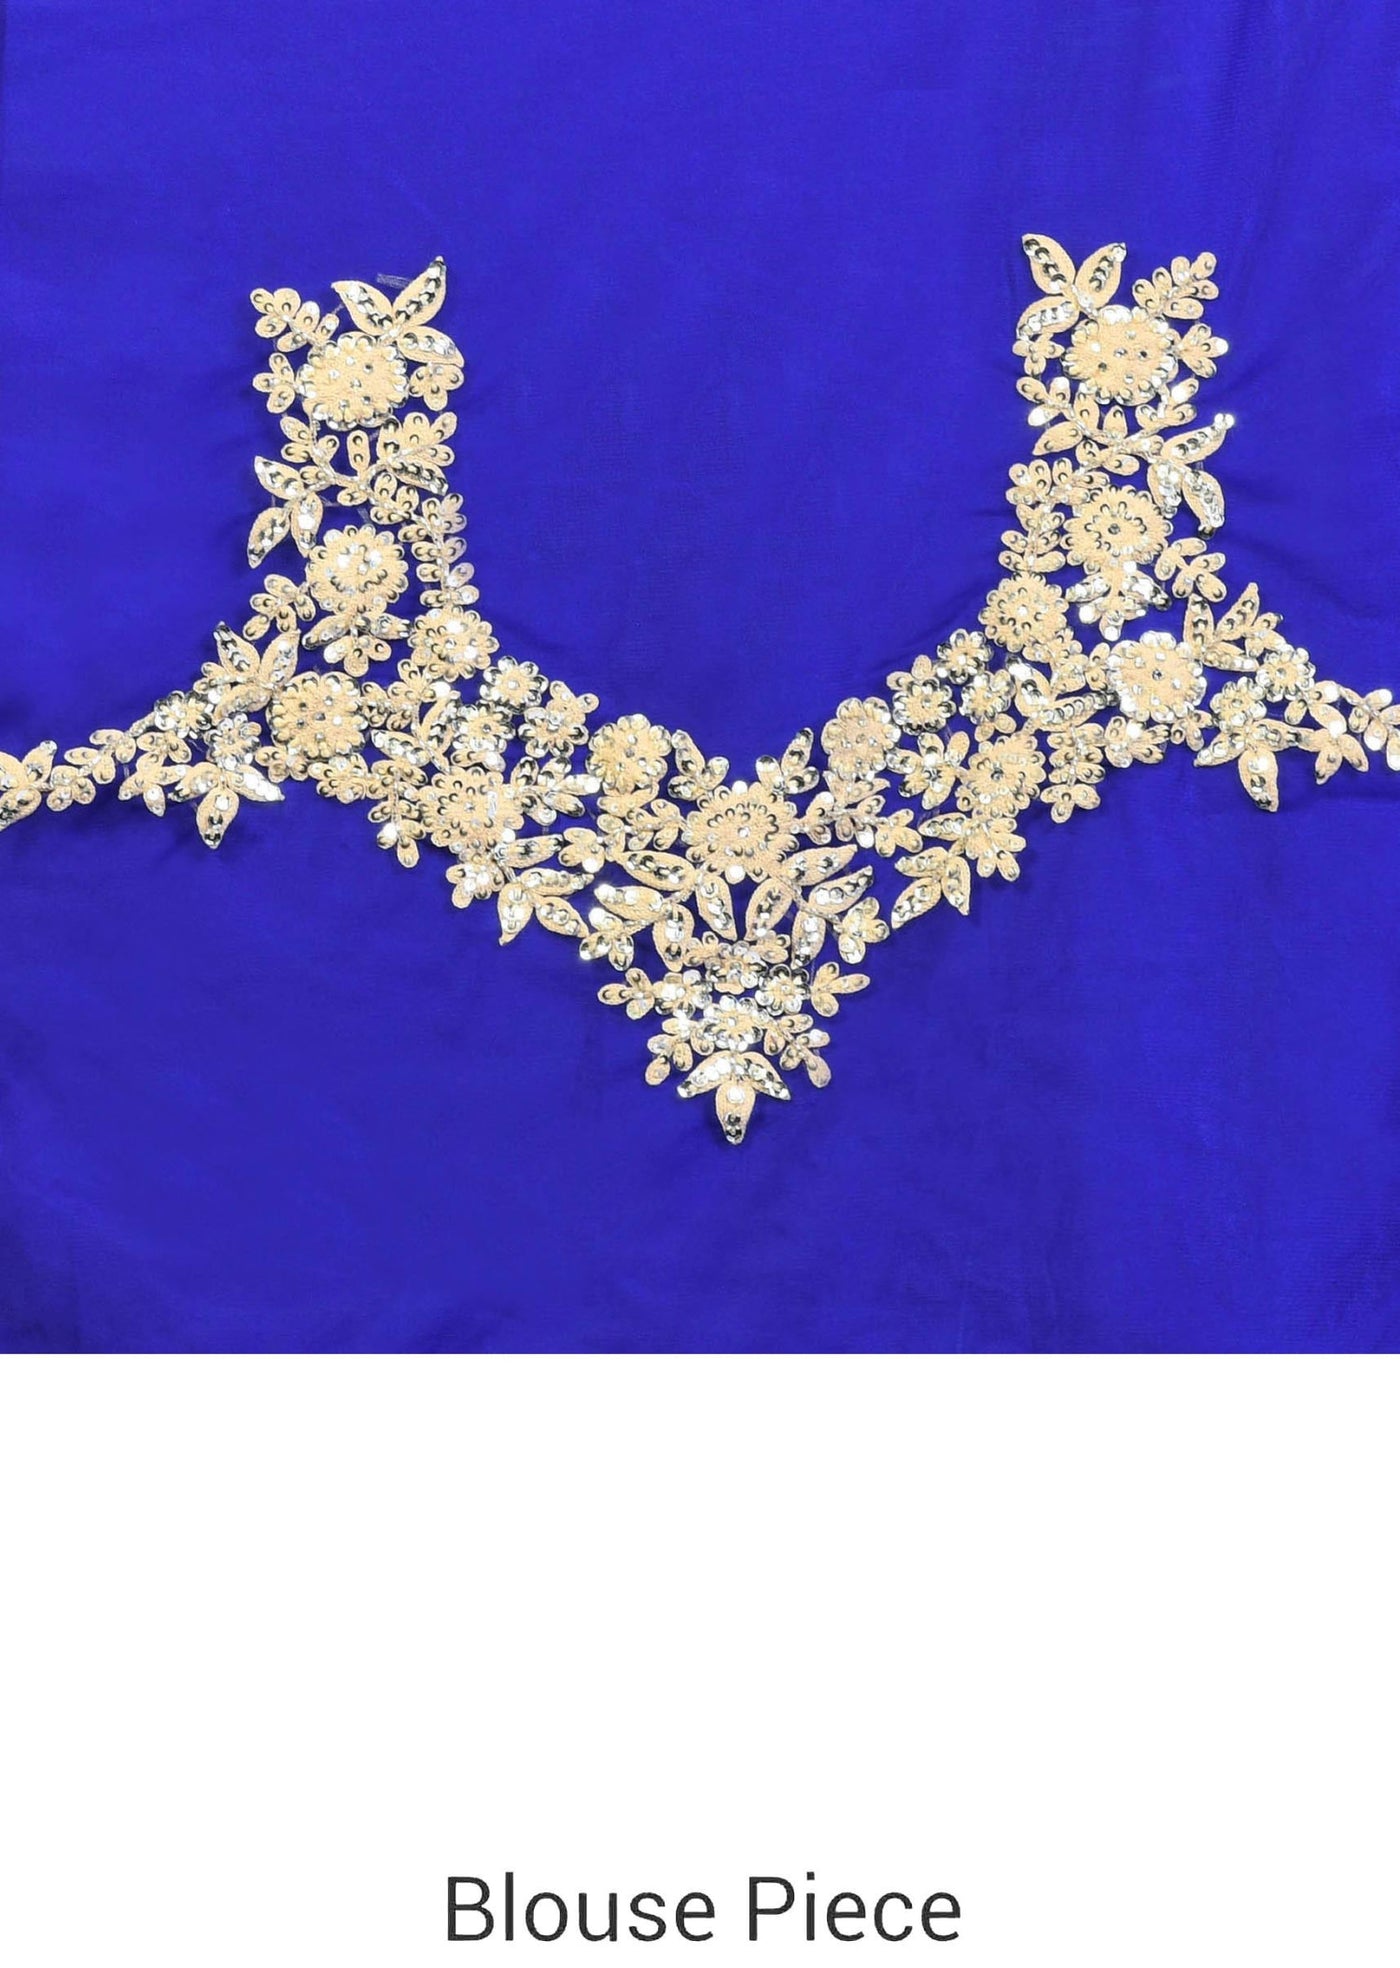 Royal blue lehenga in raw silk with resham and dori embroidery - Indian Clothing in Denver, CO, Aurora, CO, Boulder, CO, Fort Collins, CO, Colorado Springs, CO, Parker, CO, Highlands Ranch, CO, Cherry Creek, CO, Centennial, CO, and Longmont, CO. Nationwide shipping USA - India Fashion X